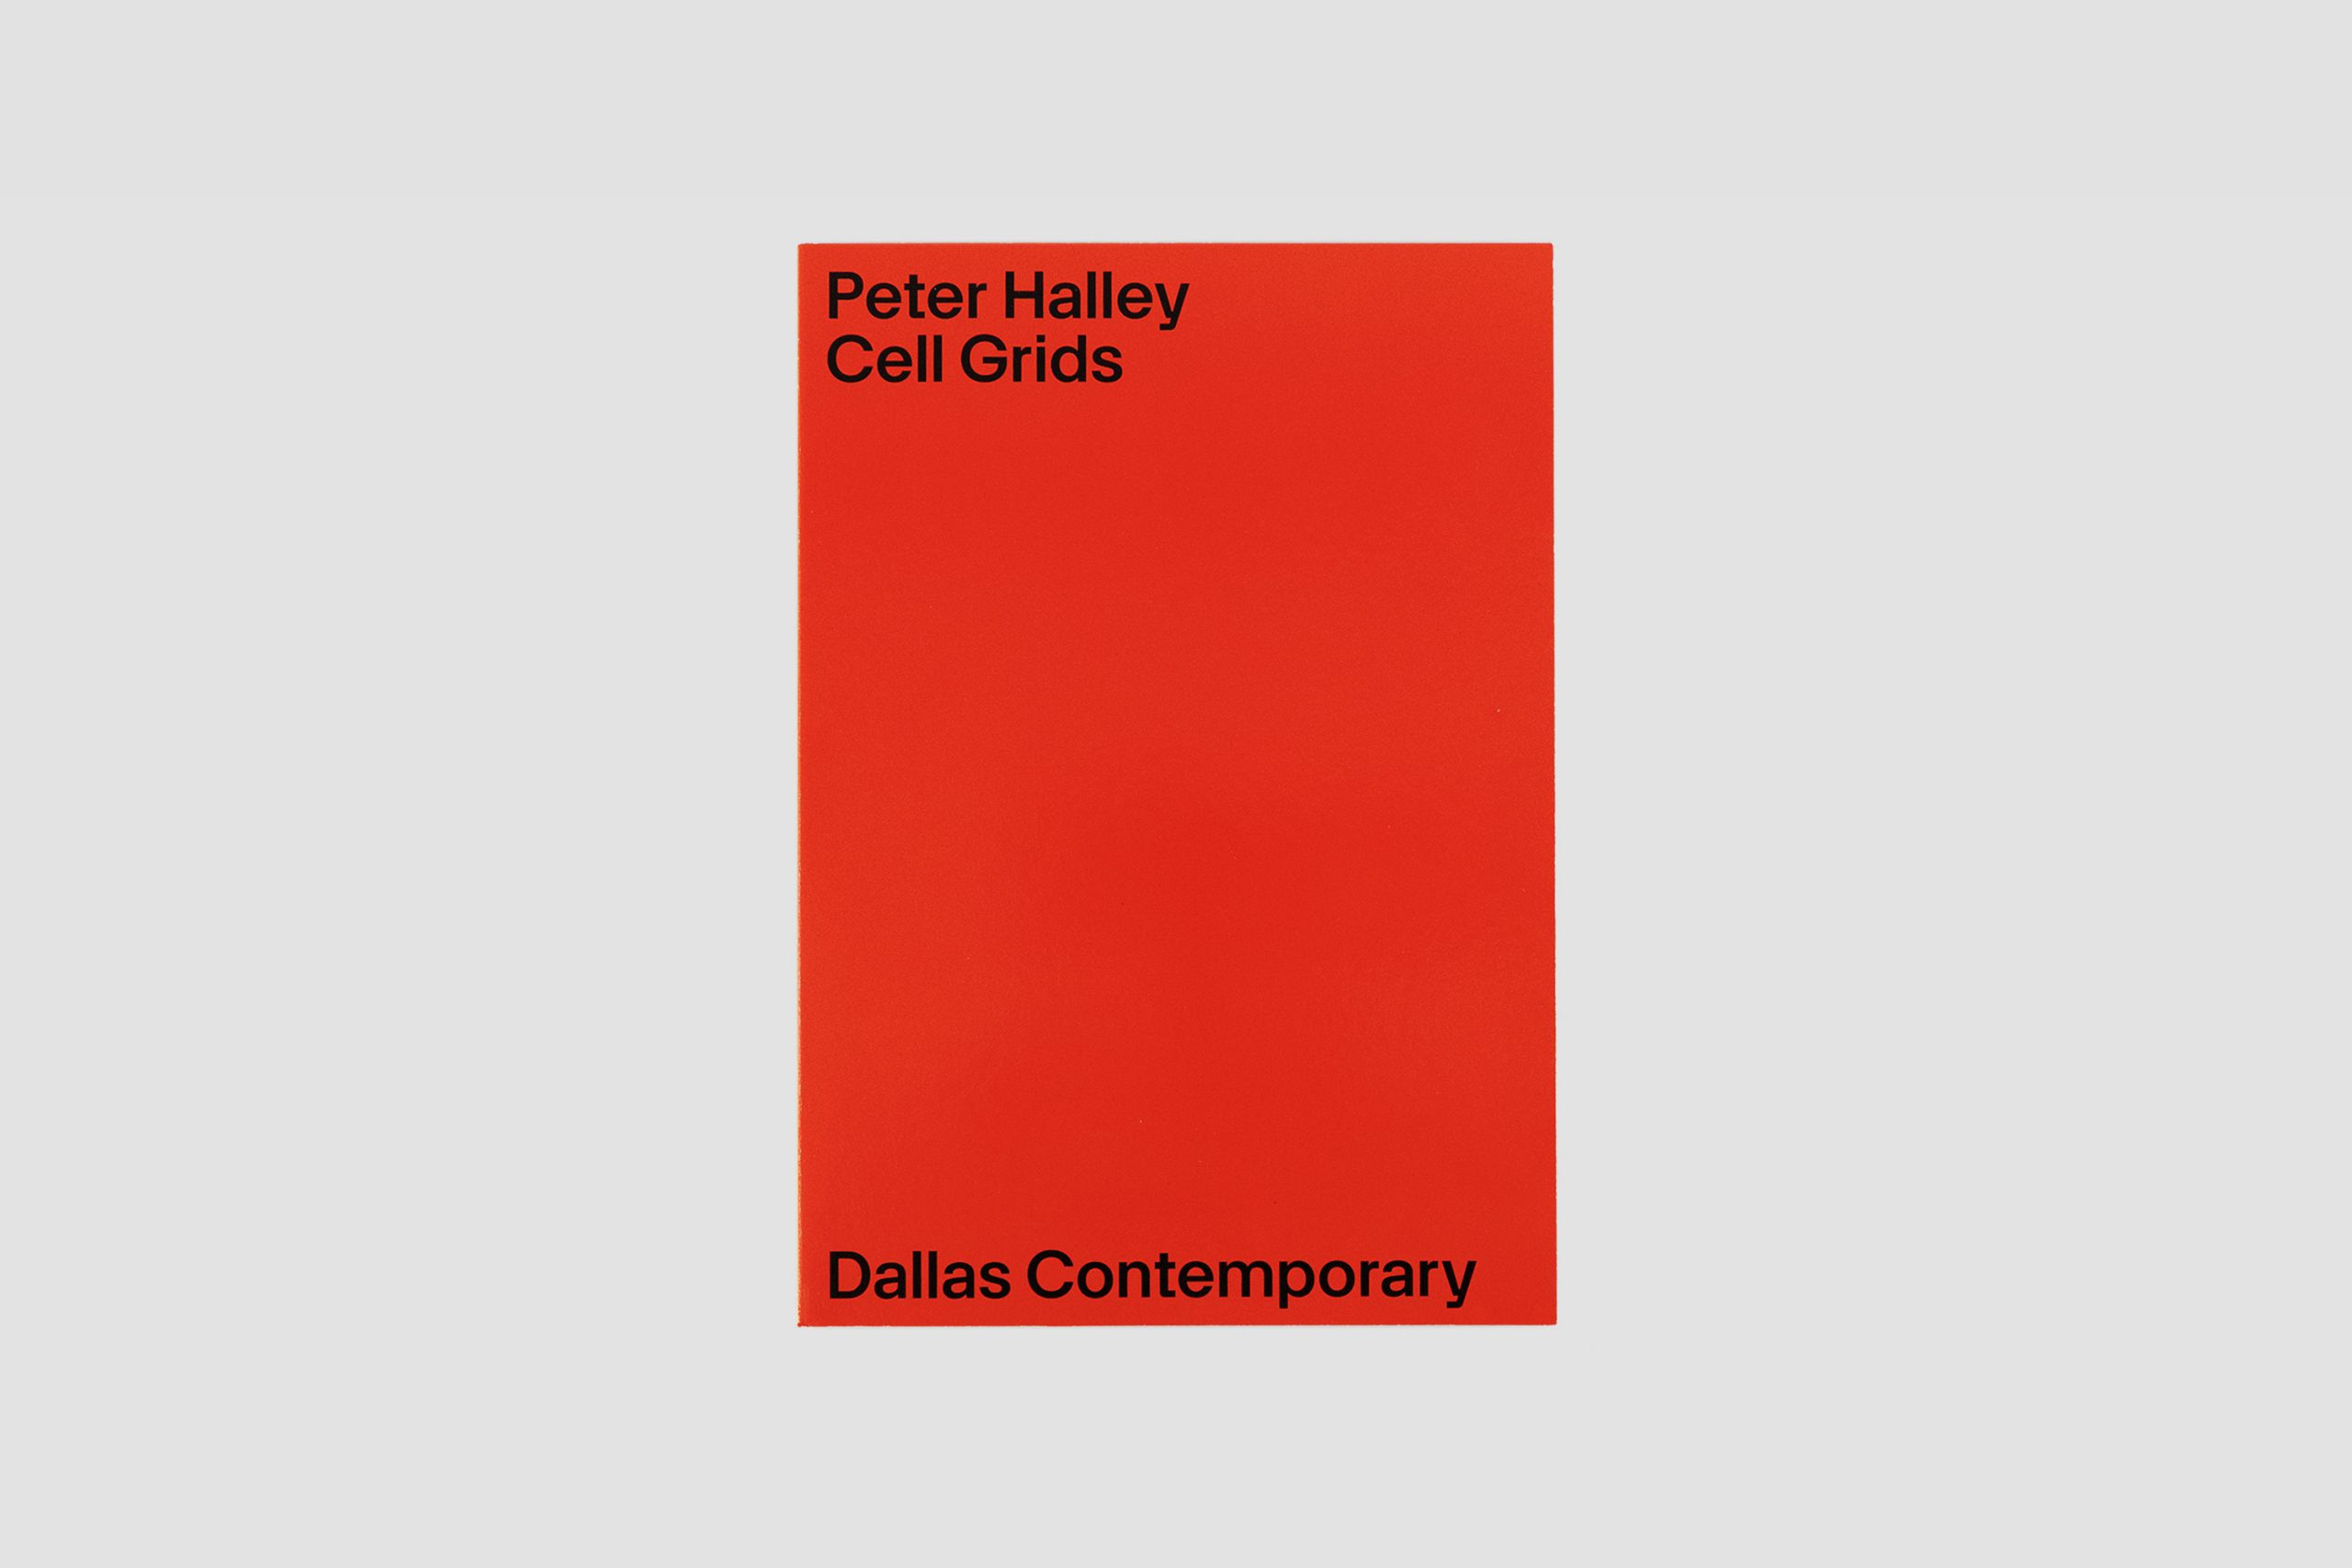 Peter Halley: Cell Grids